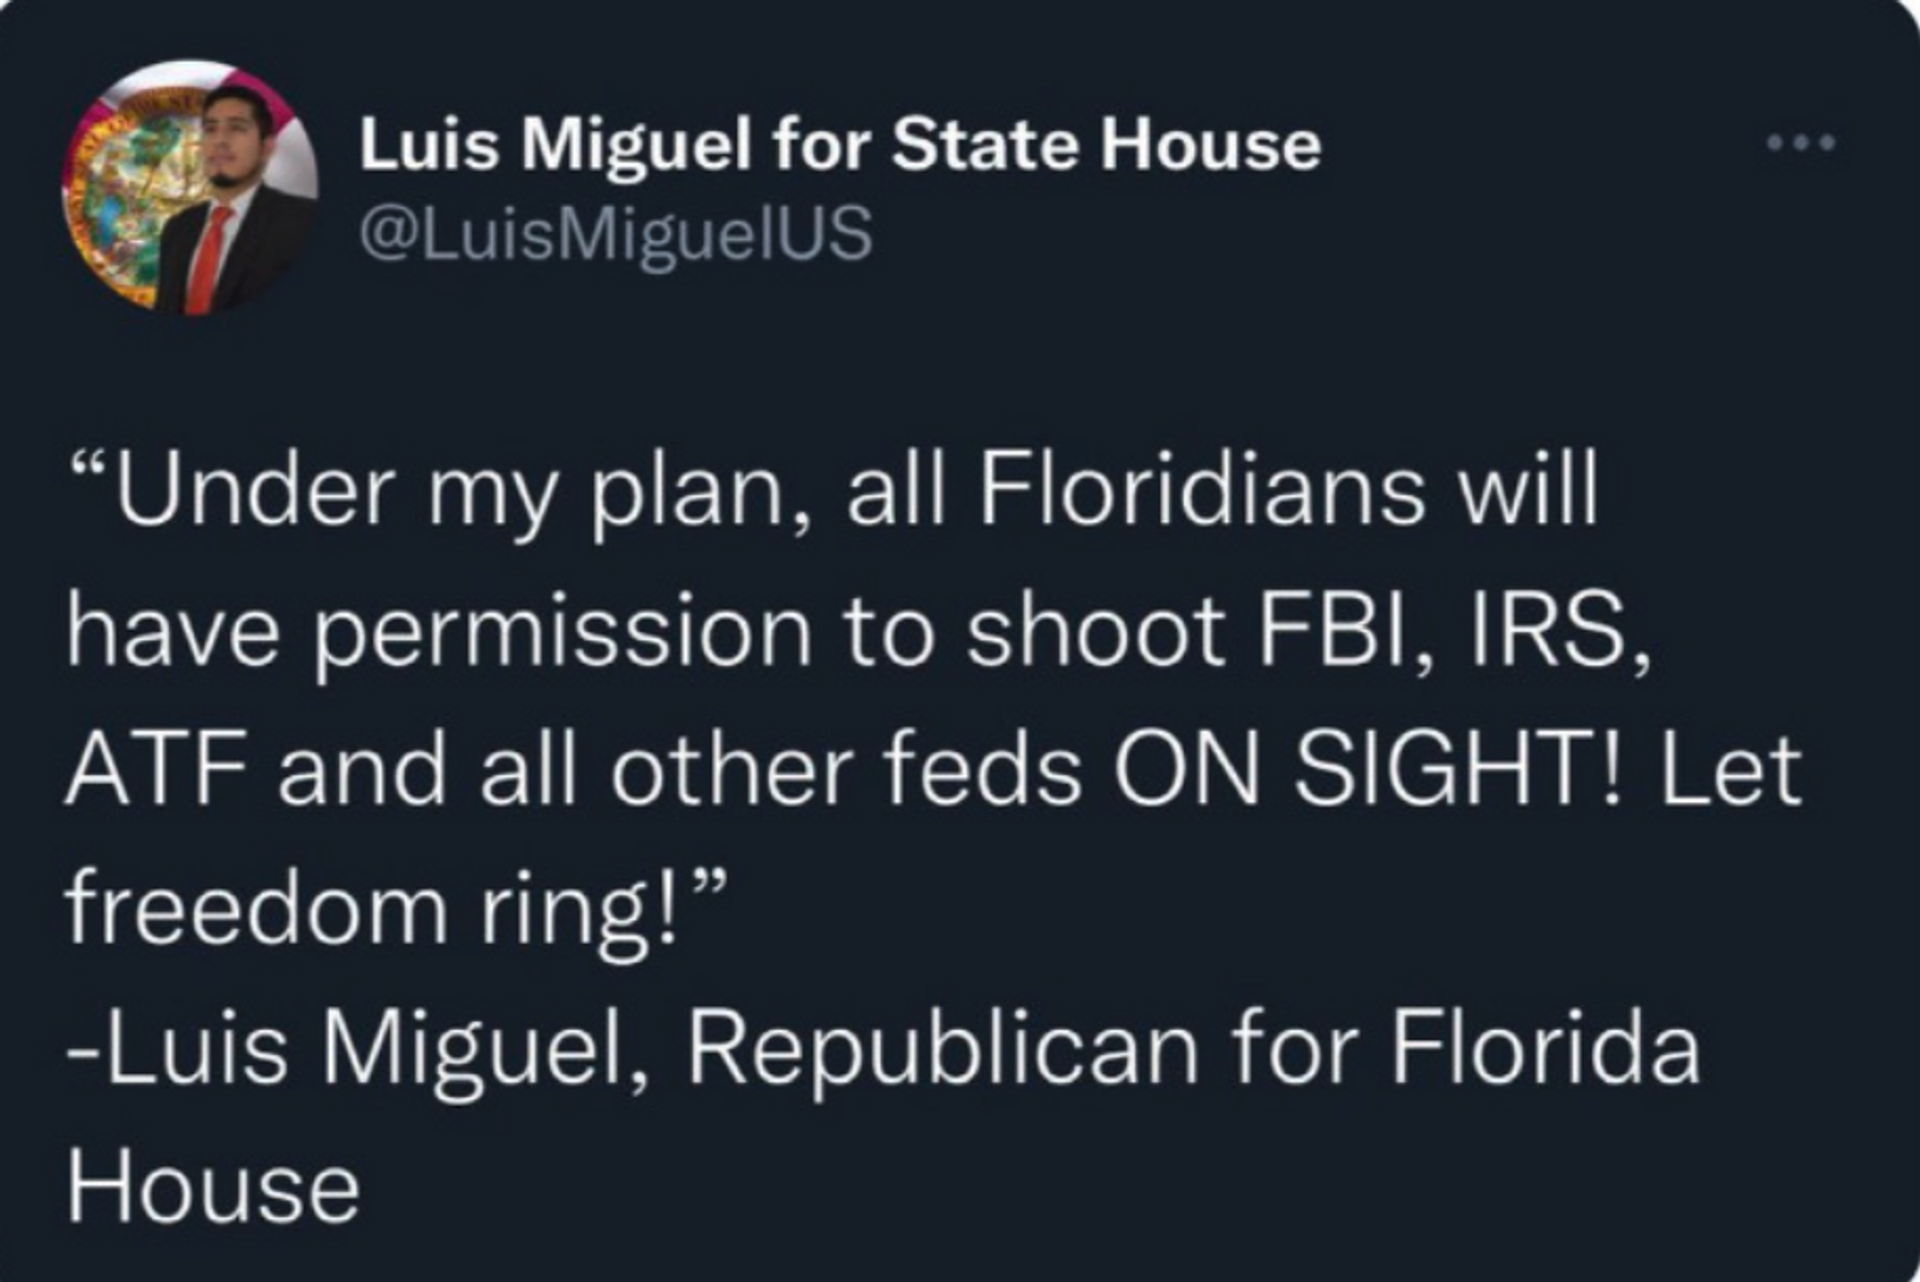 Screenshot captures tweet issued by Florida GOP candidate Luis Miguel that called for the killing of federal agents. - Sputnik International, 1920, 20.08.2022